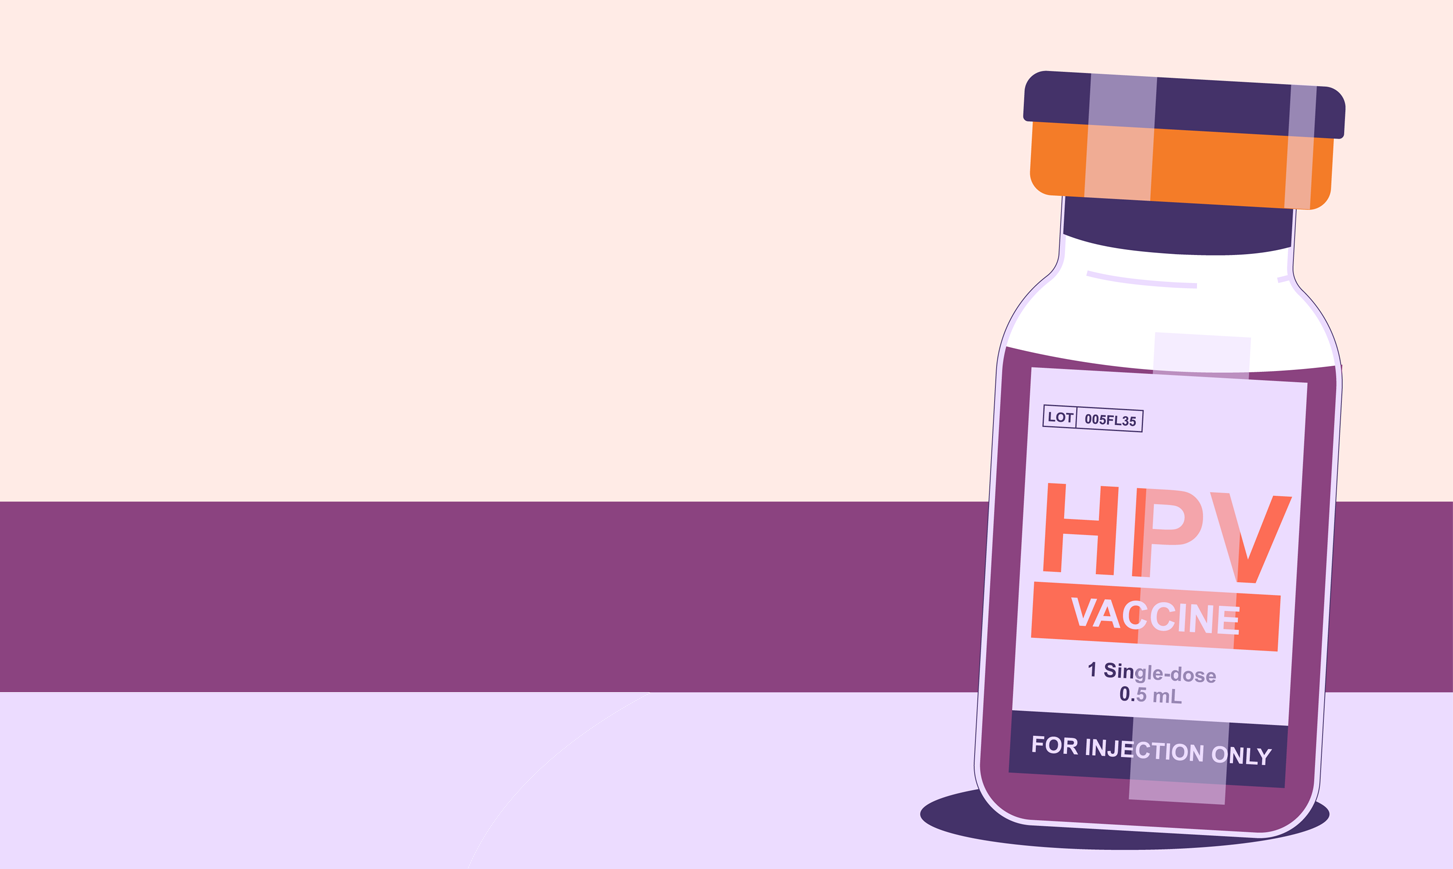 HPV Vaccination Infographic